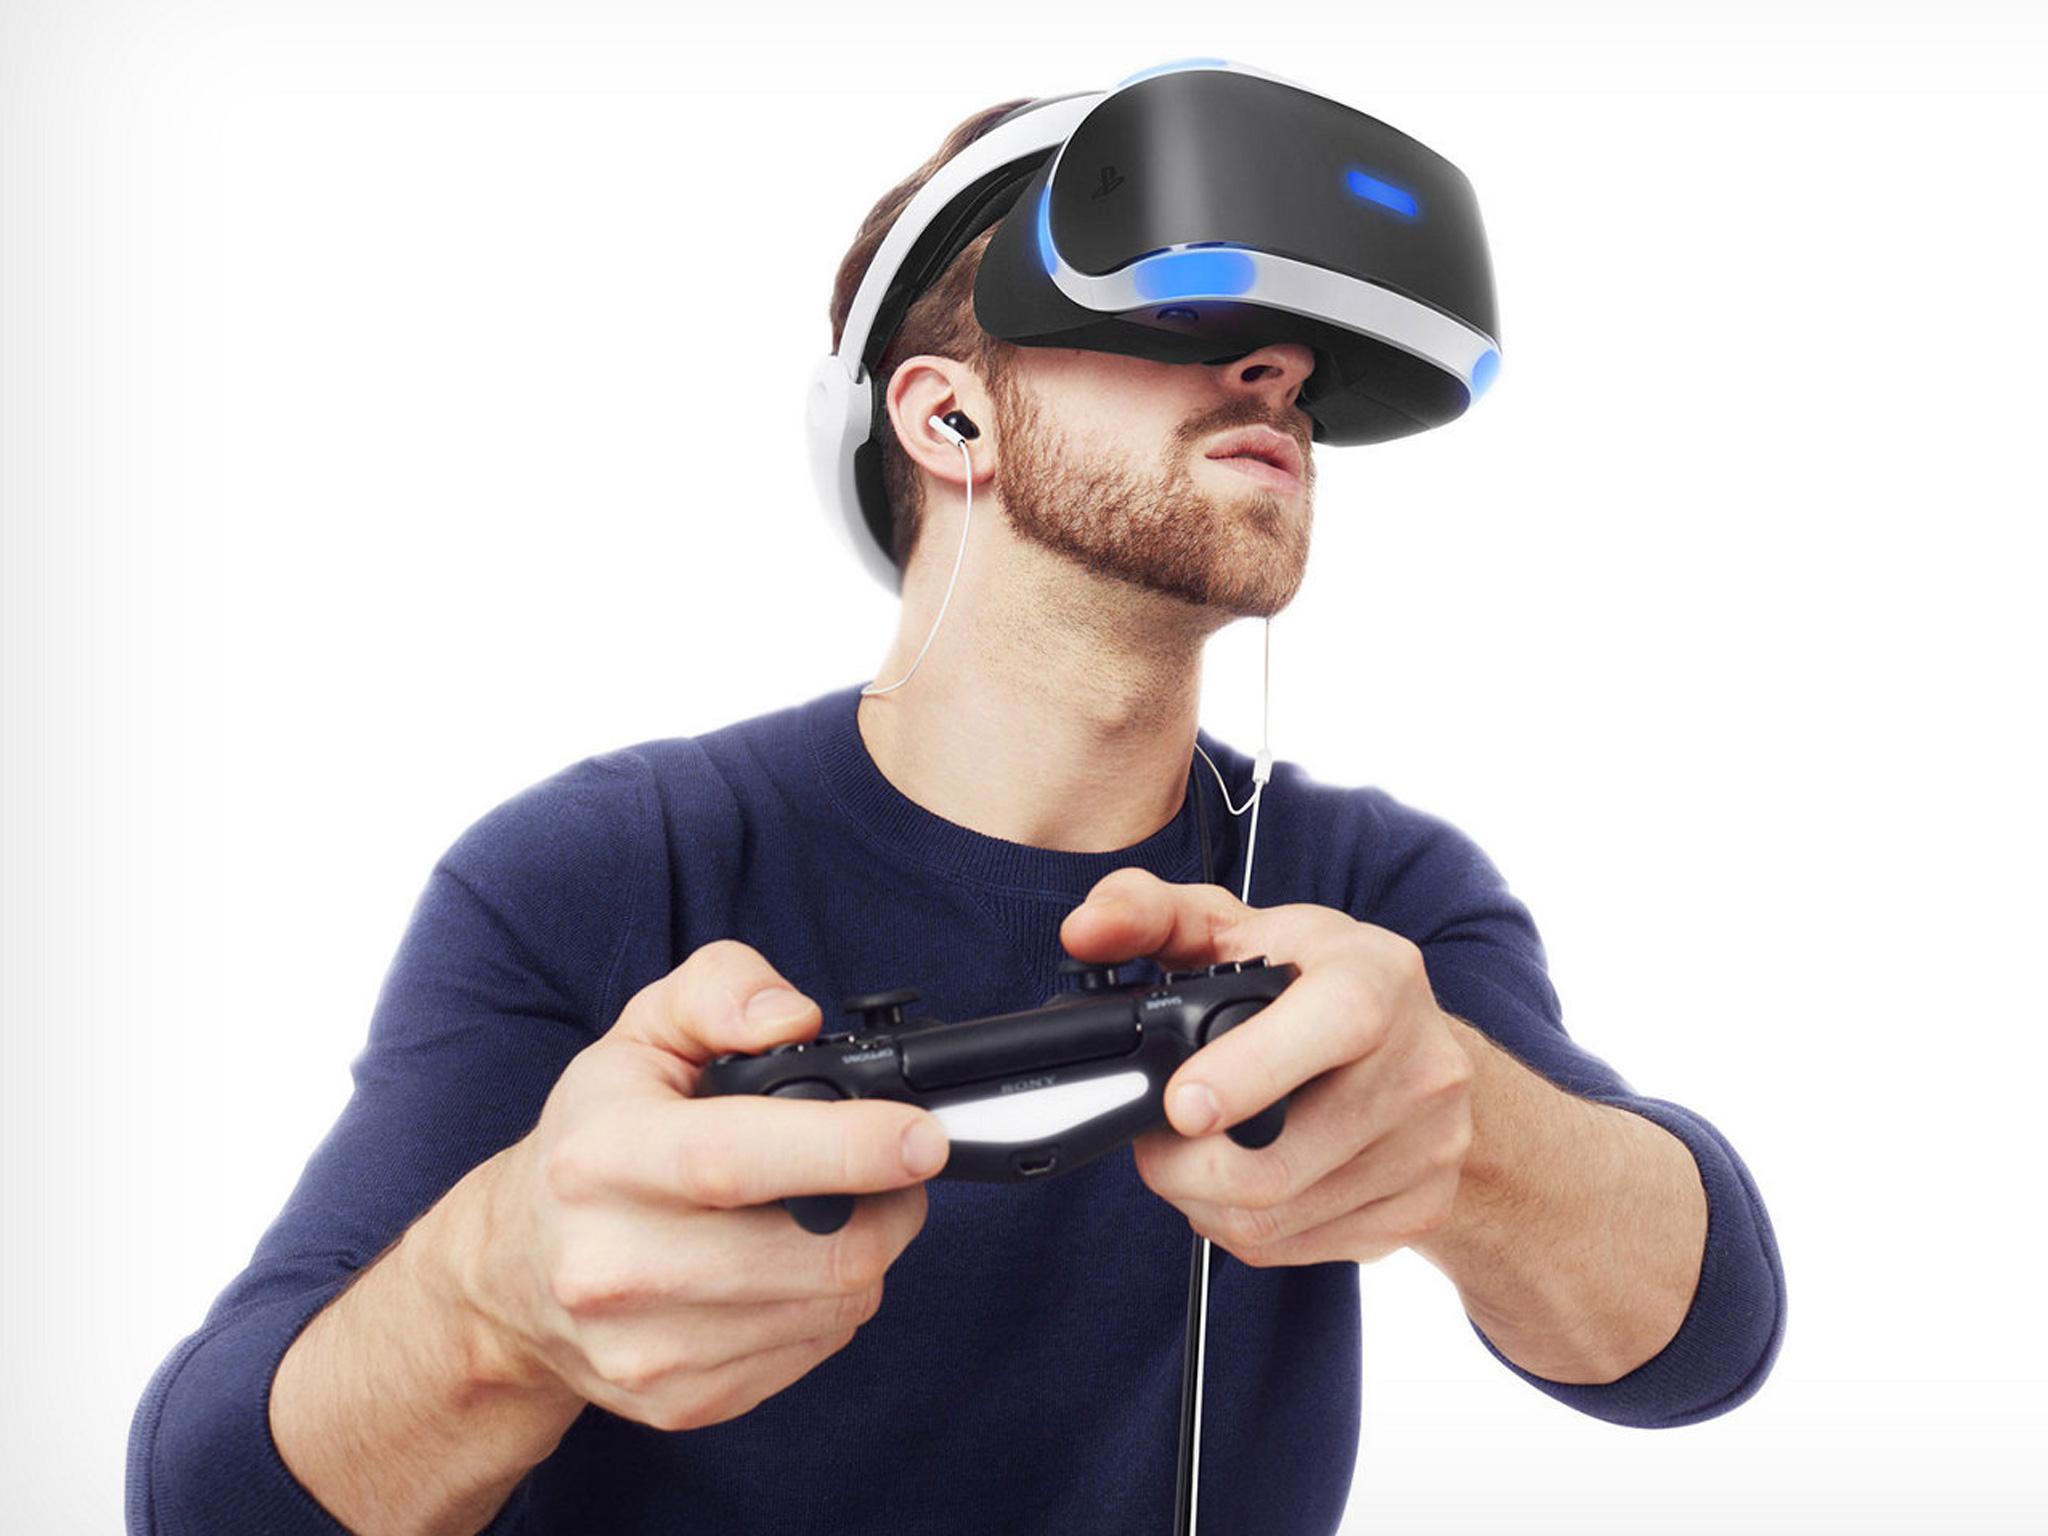 The 11 best games on PlayStation VR, Games